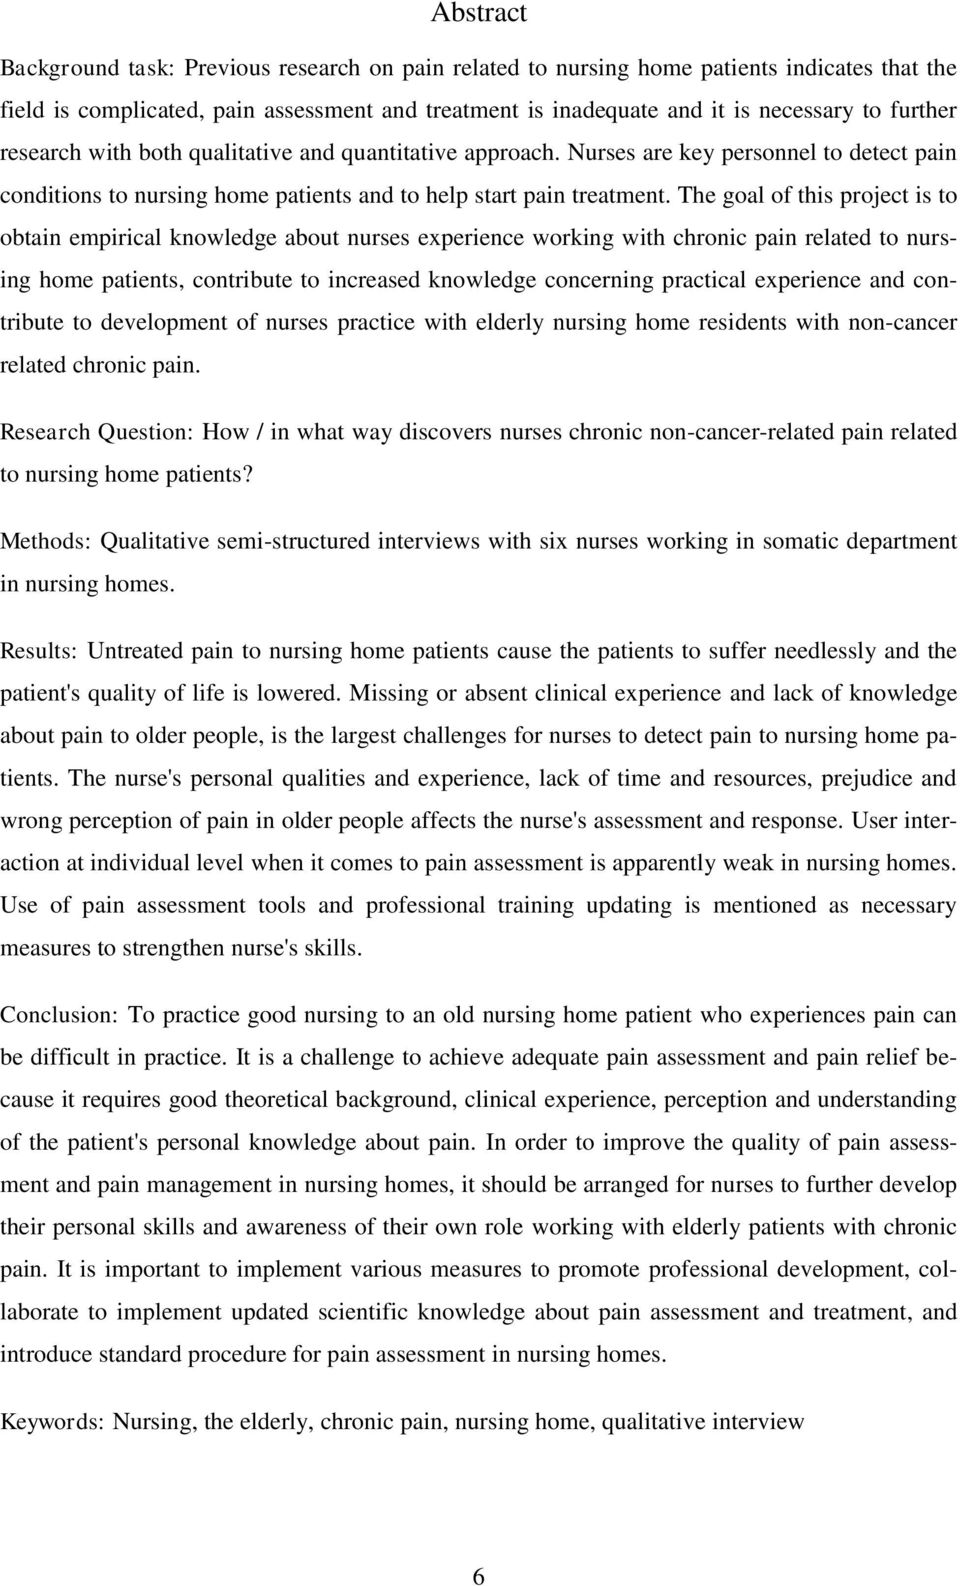 The goal of this project is to obtain empirical knowledge about nurses experience working with chronic pain related to nursing home patients, contribute to increased knowledge concerning practical